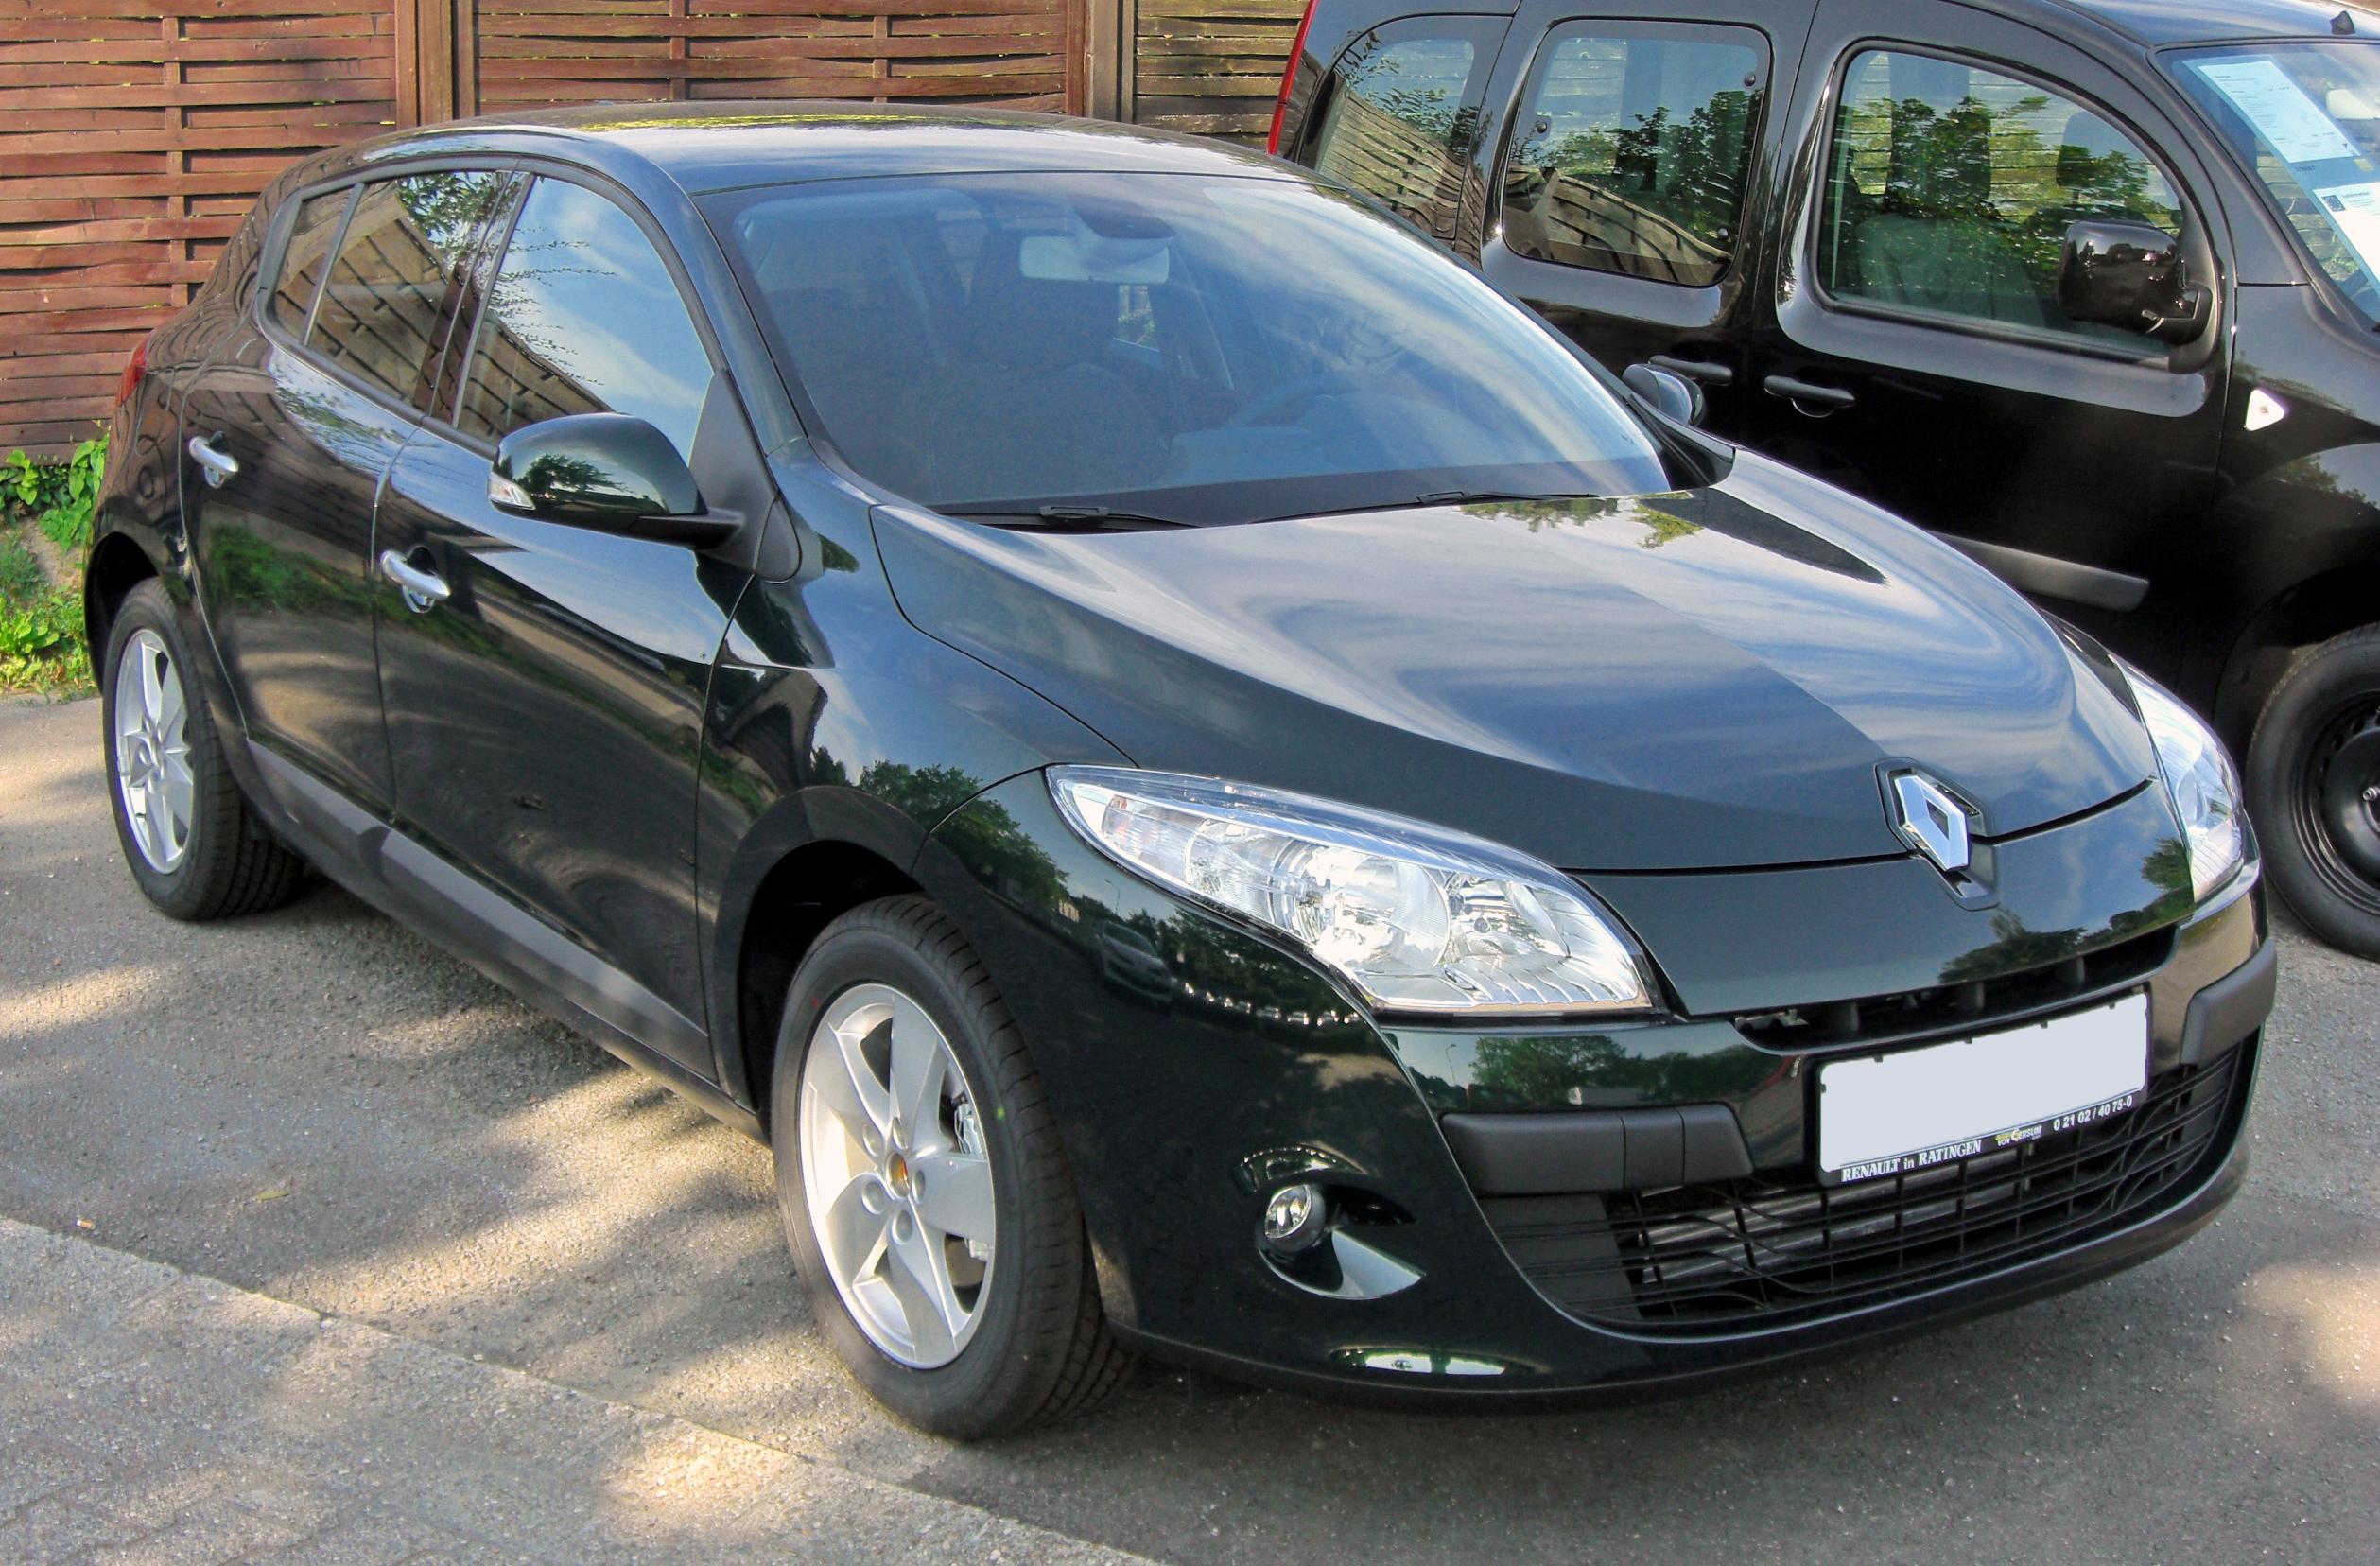 File:Renault Clio III Facelift 20090603 front.JPG - Wikimedia Commons